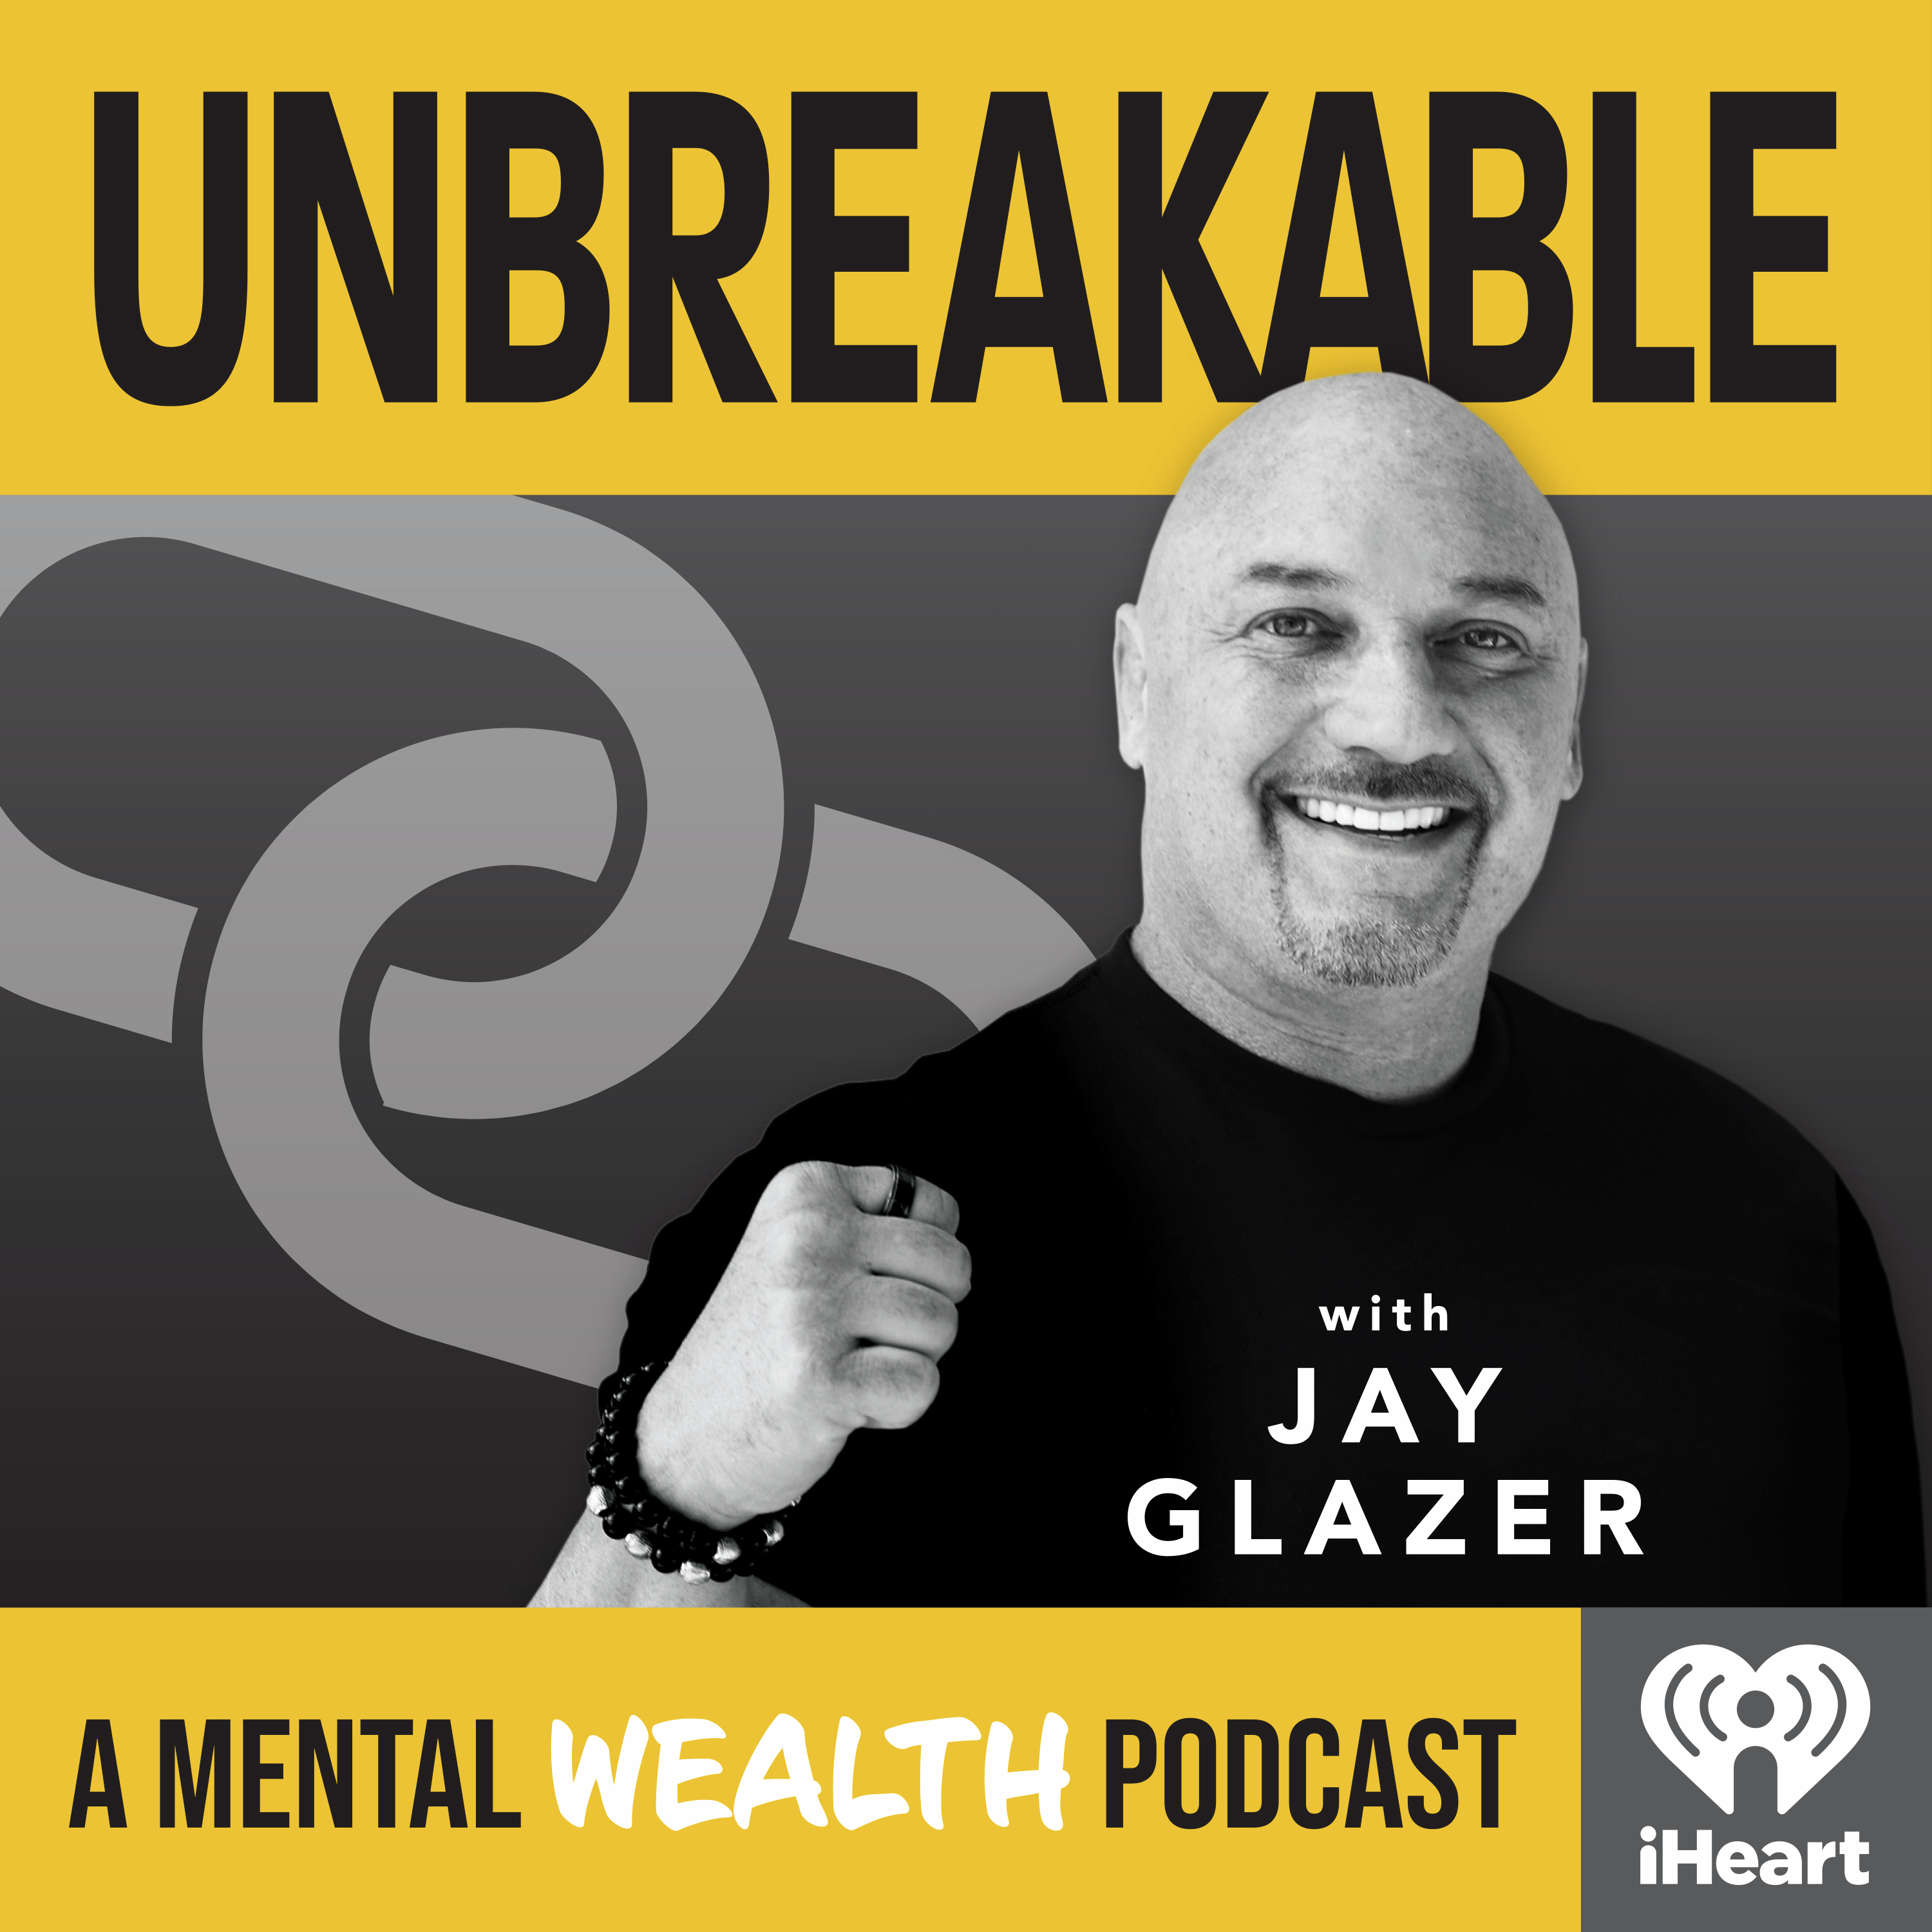 Unbreakable Episode 54 - Dr. Jessica Chaudhary